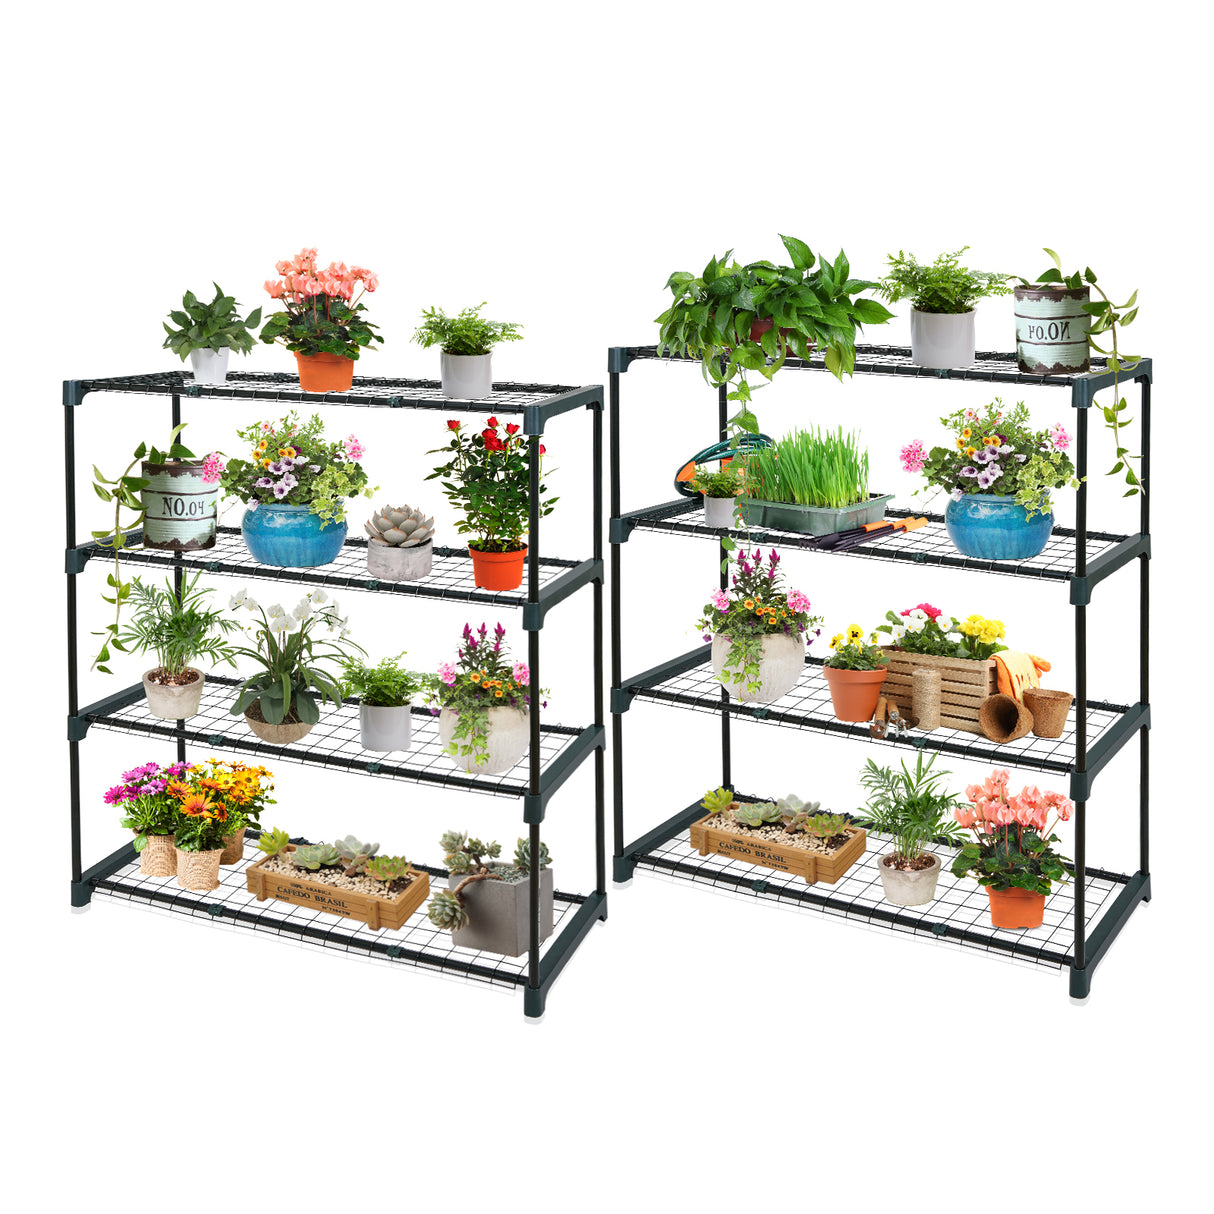 EAGLE PEAK Greenhouse Shelving Staging Double 4 Tier, Outdoor / Indoor Plant Shelves, 35" x 12" x 42", Green